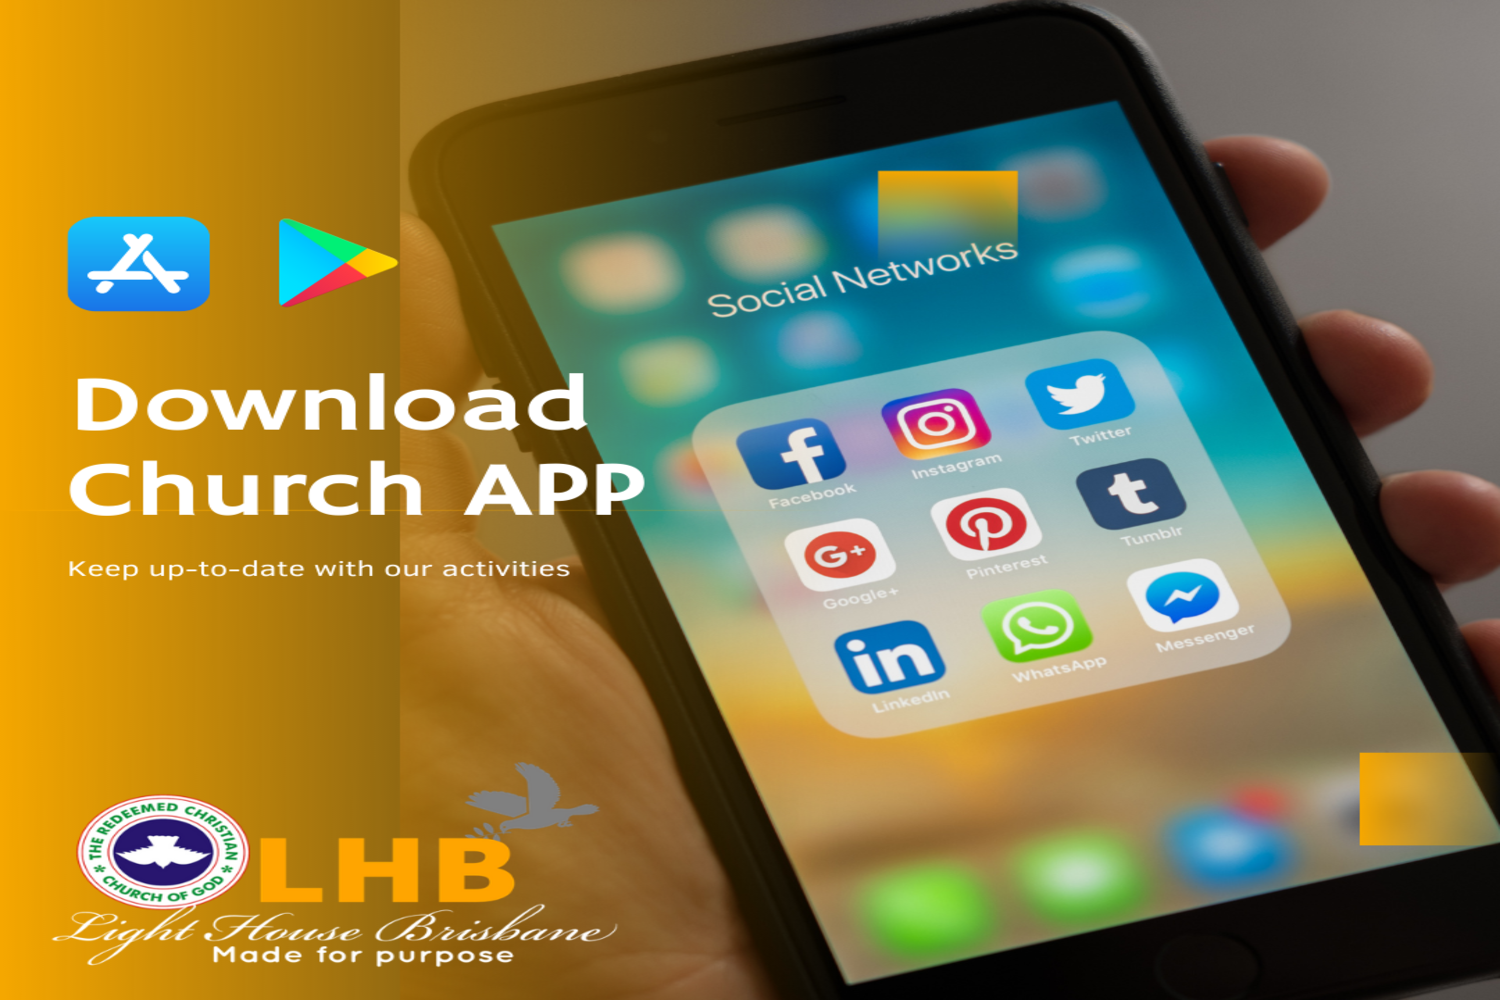 Download the Church Mobile App